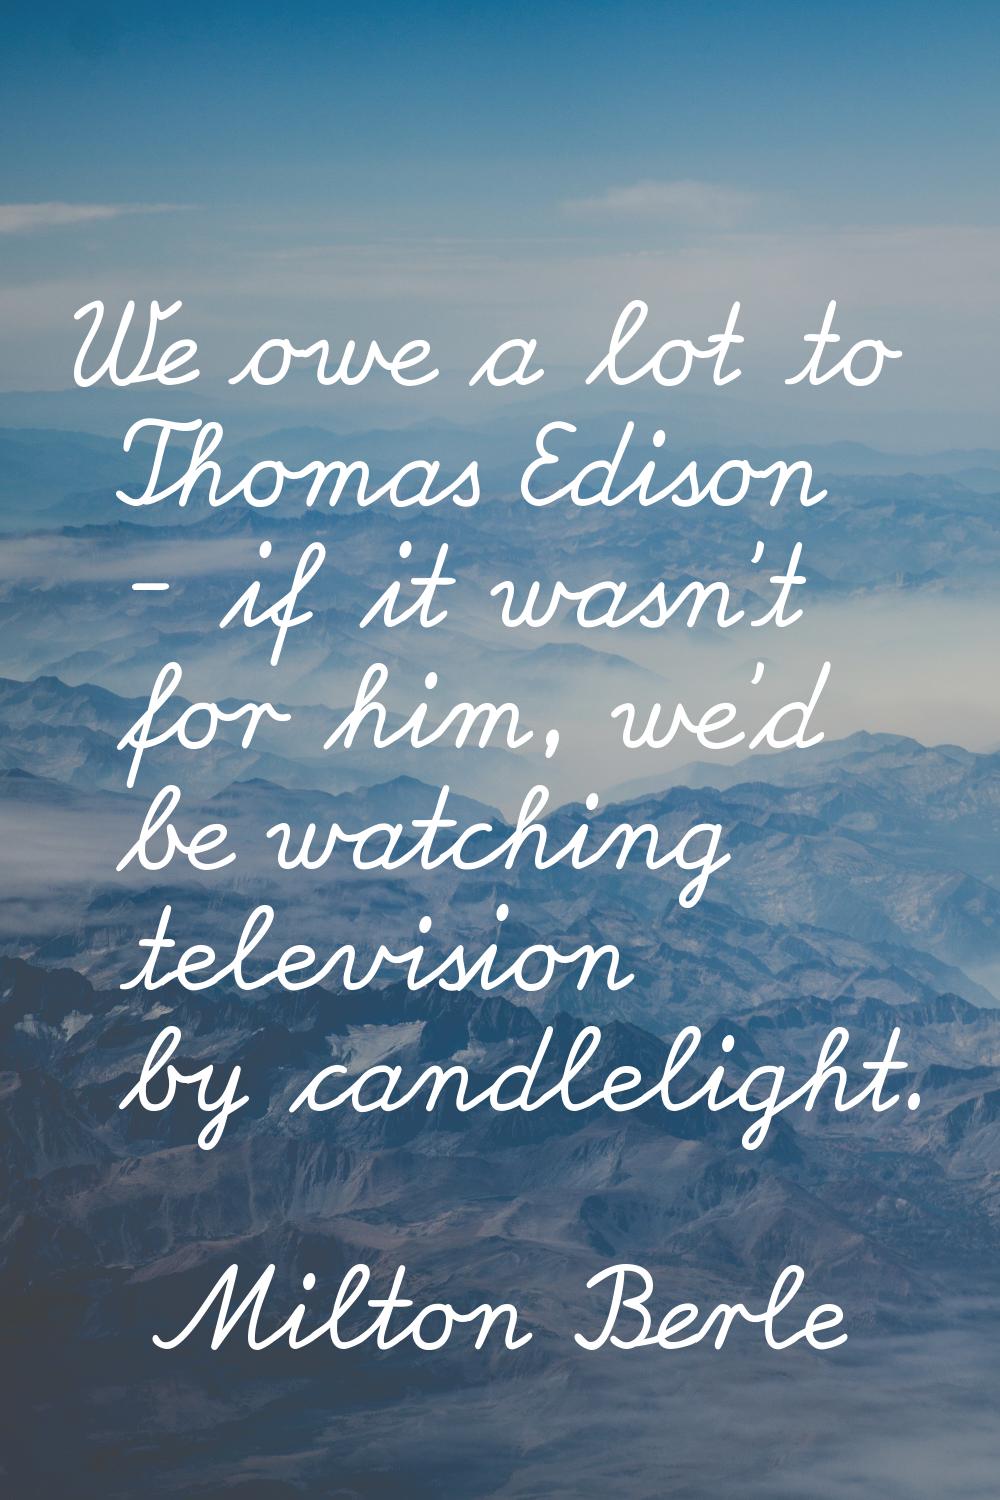 We owe a lot to Thomas Edison - if it wasn't for him, we'd be watching television by candlelight.